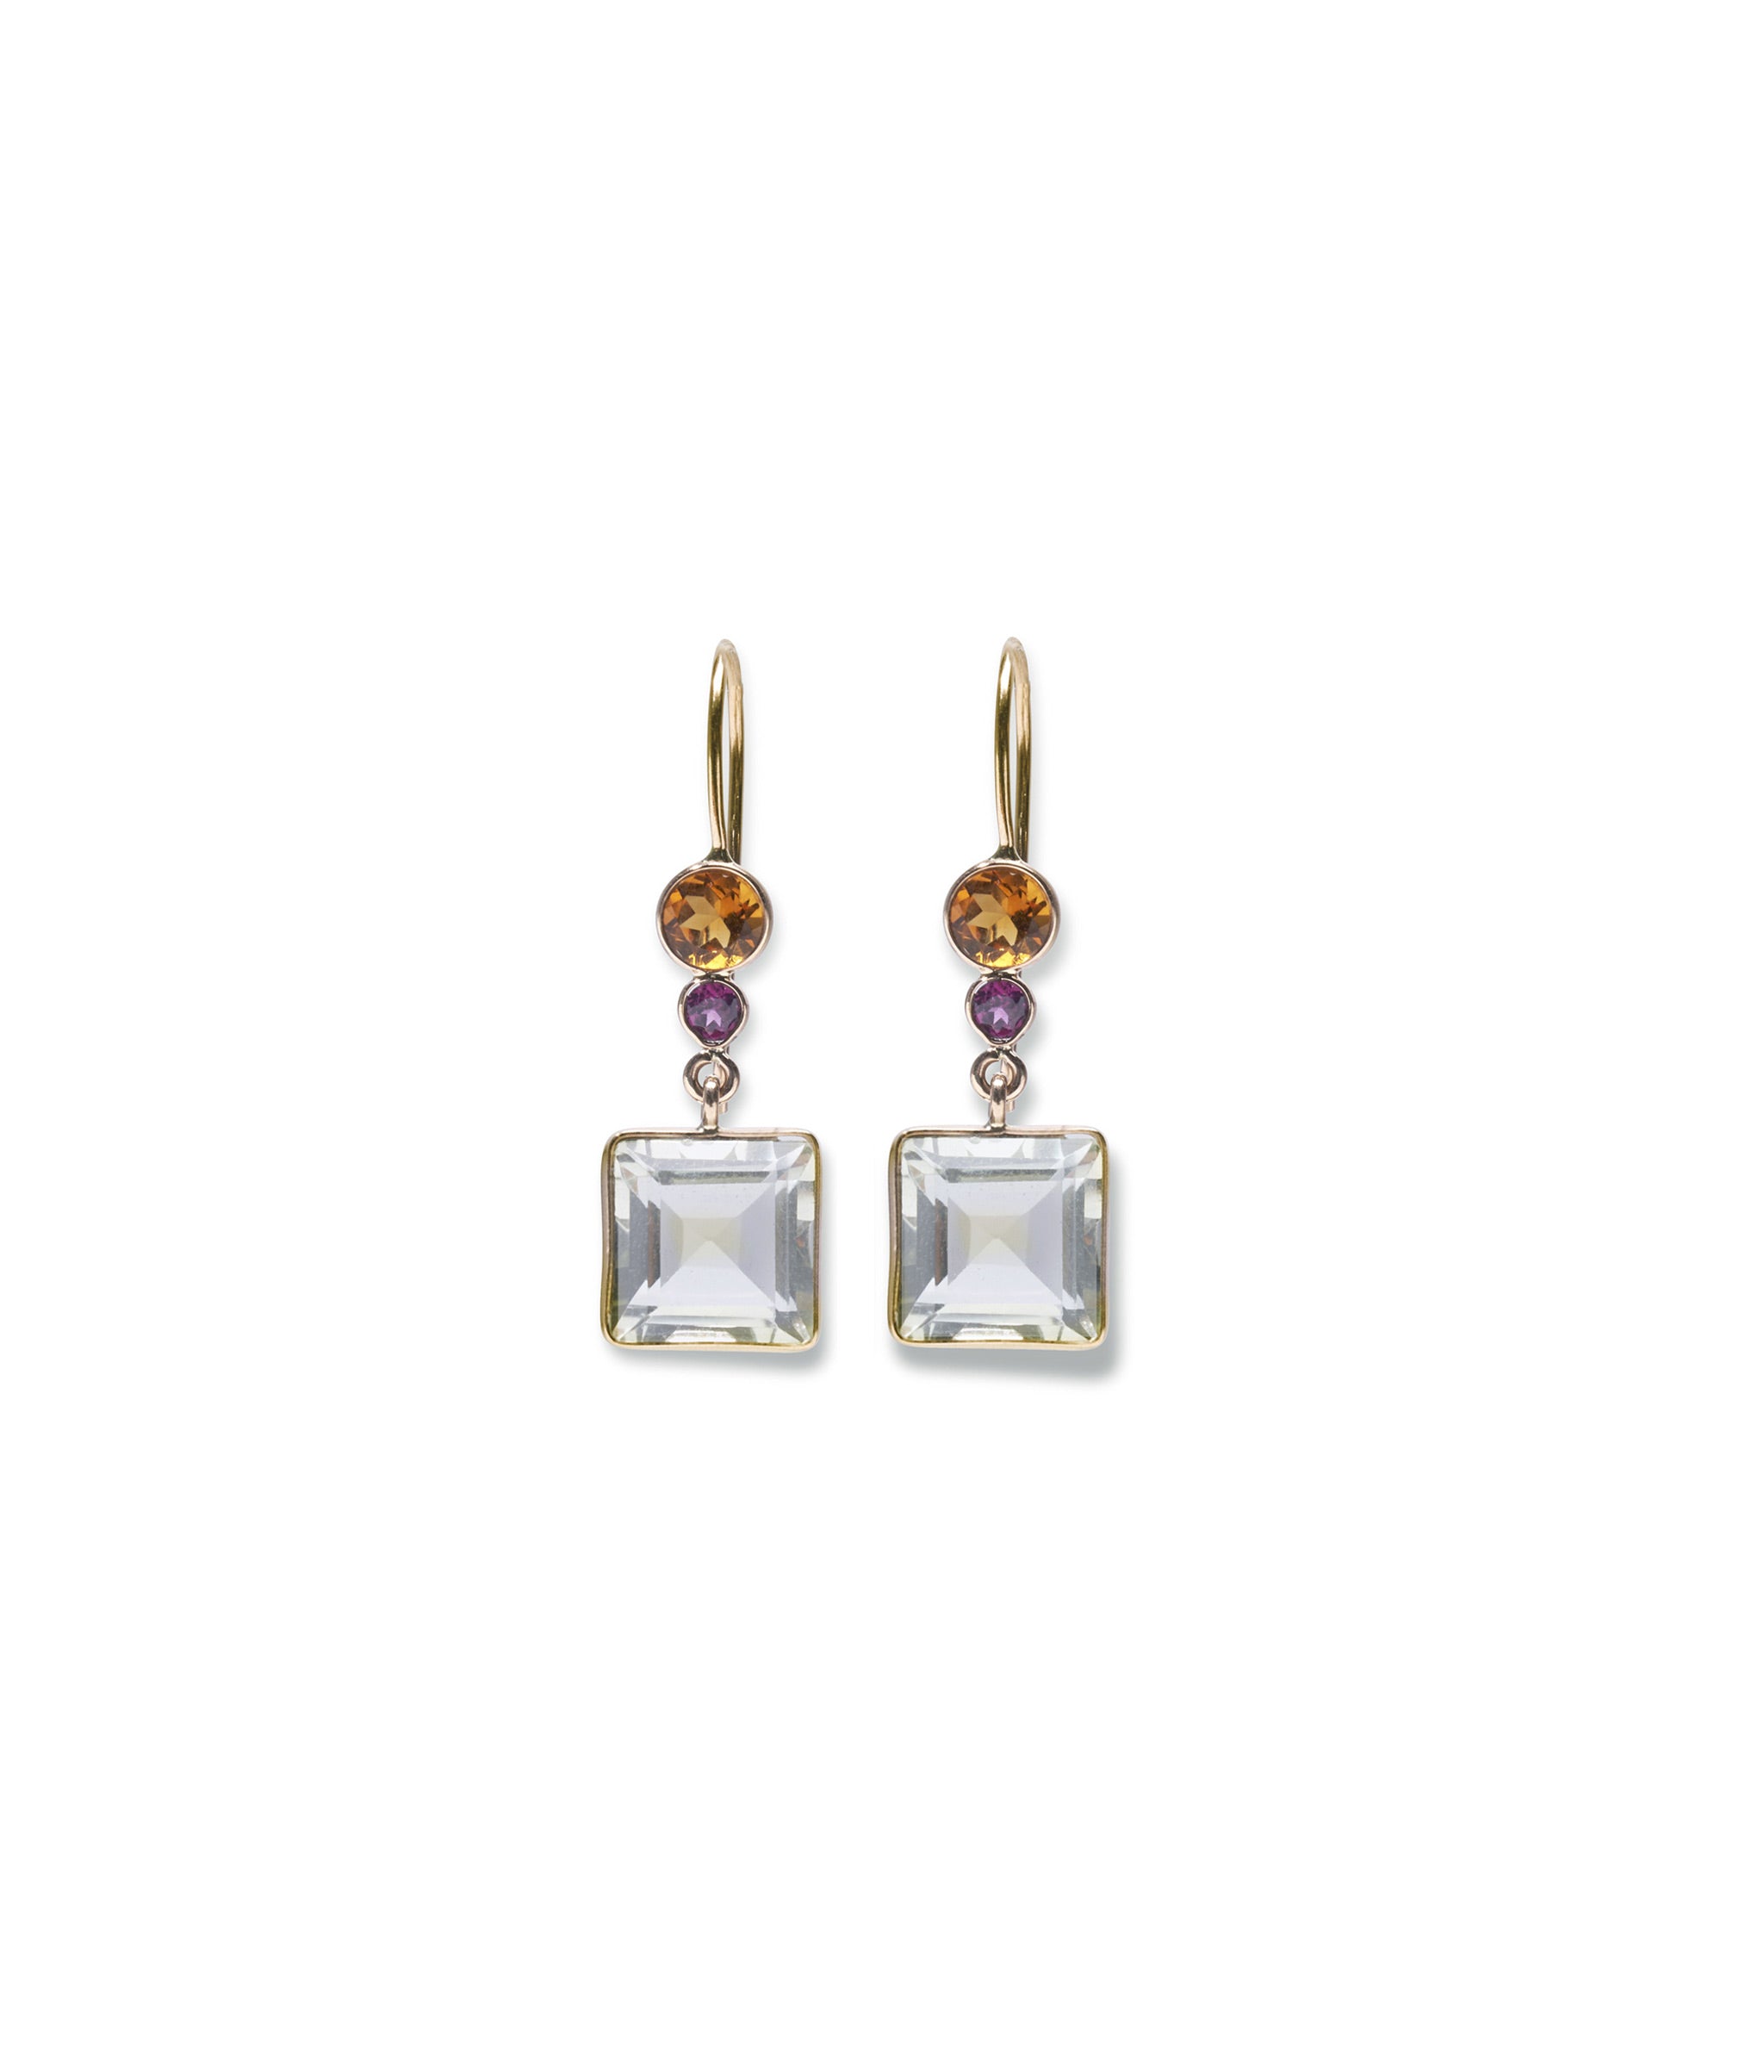 Lady Earrings in Green Amethyst. Faceted hanging green amethyst square stones with 14k gold bezels and citrine and pink rhodolite garnets.